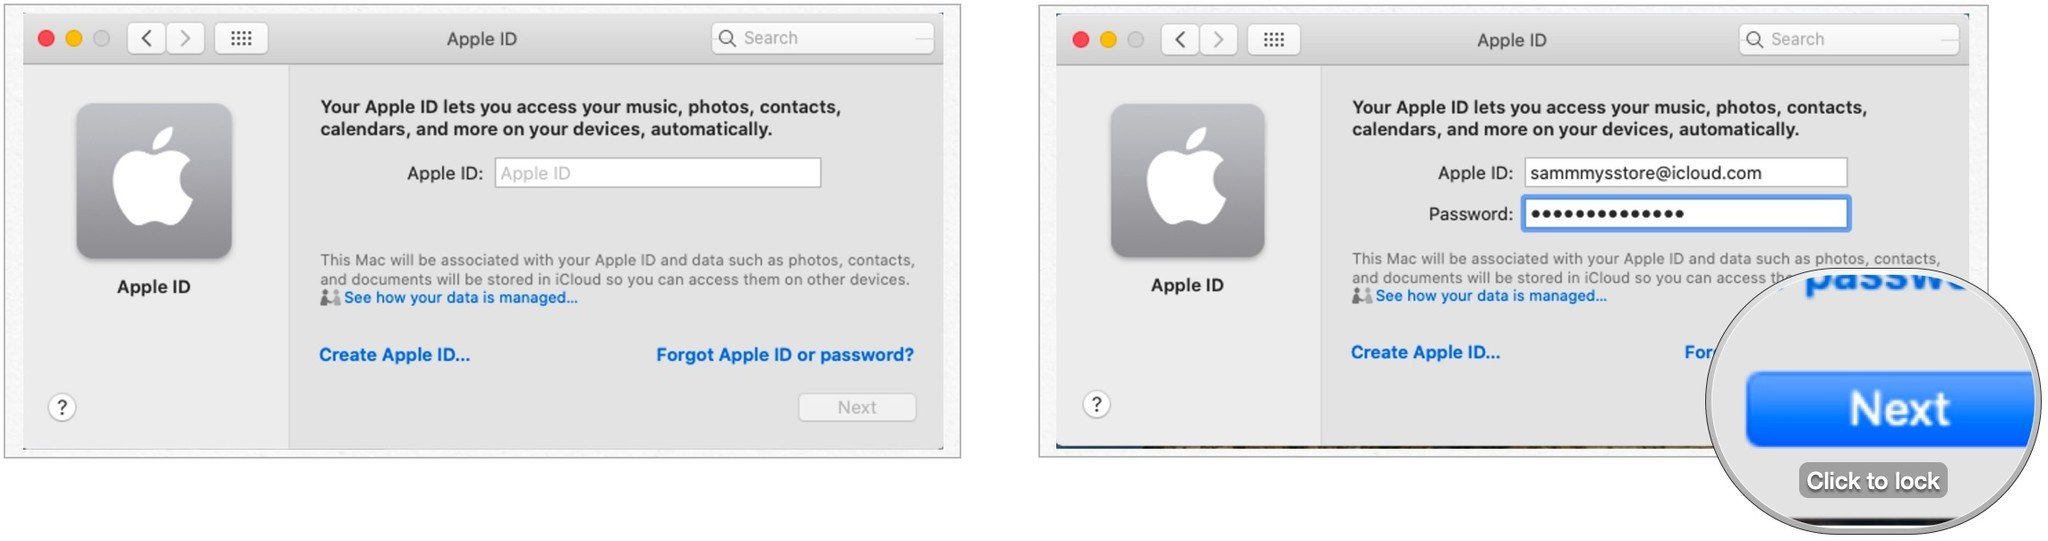 To set up iCloud on Mac, enter your Apple ID and password, then select Next.